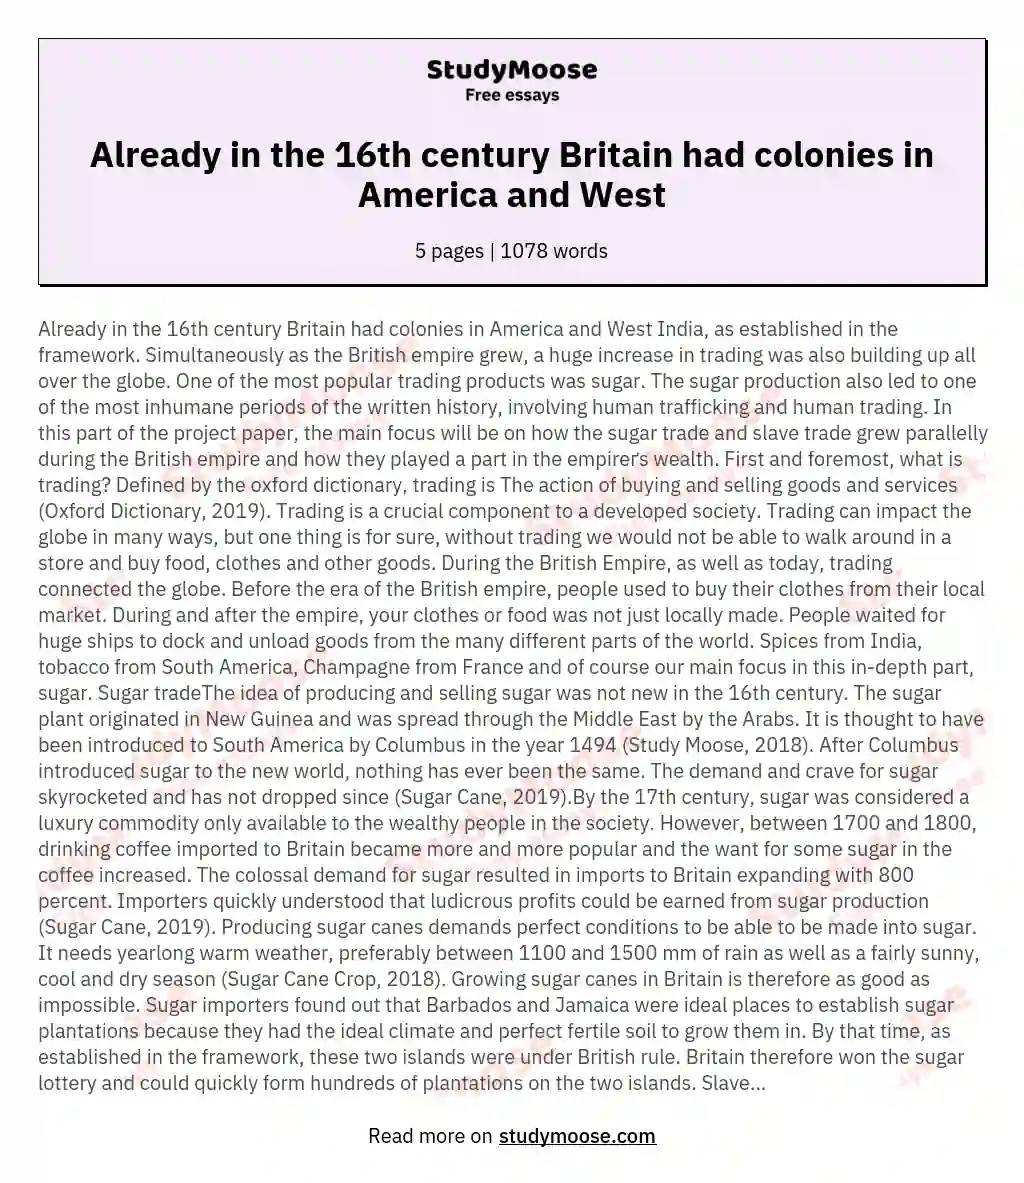 Already in the 16th century Britain had colonies in America and West